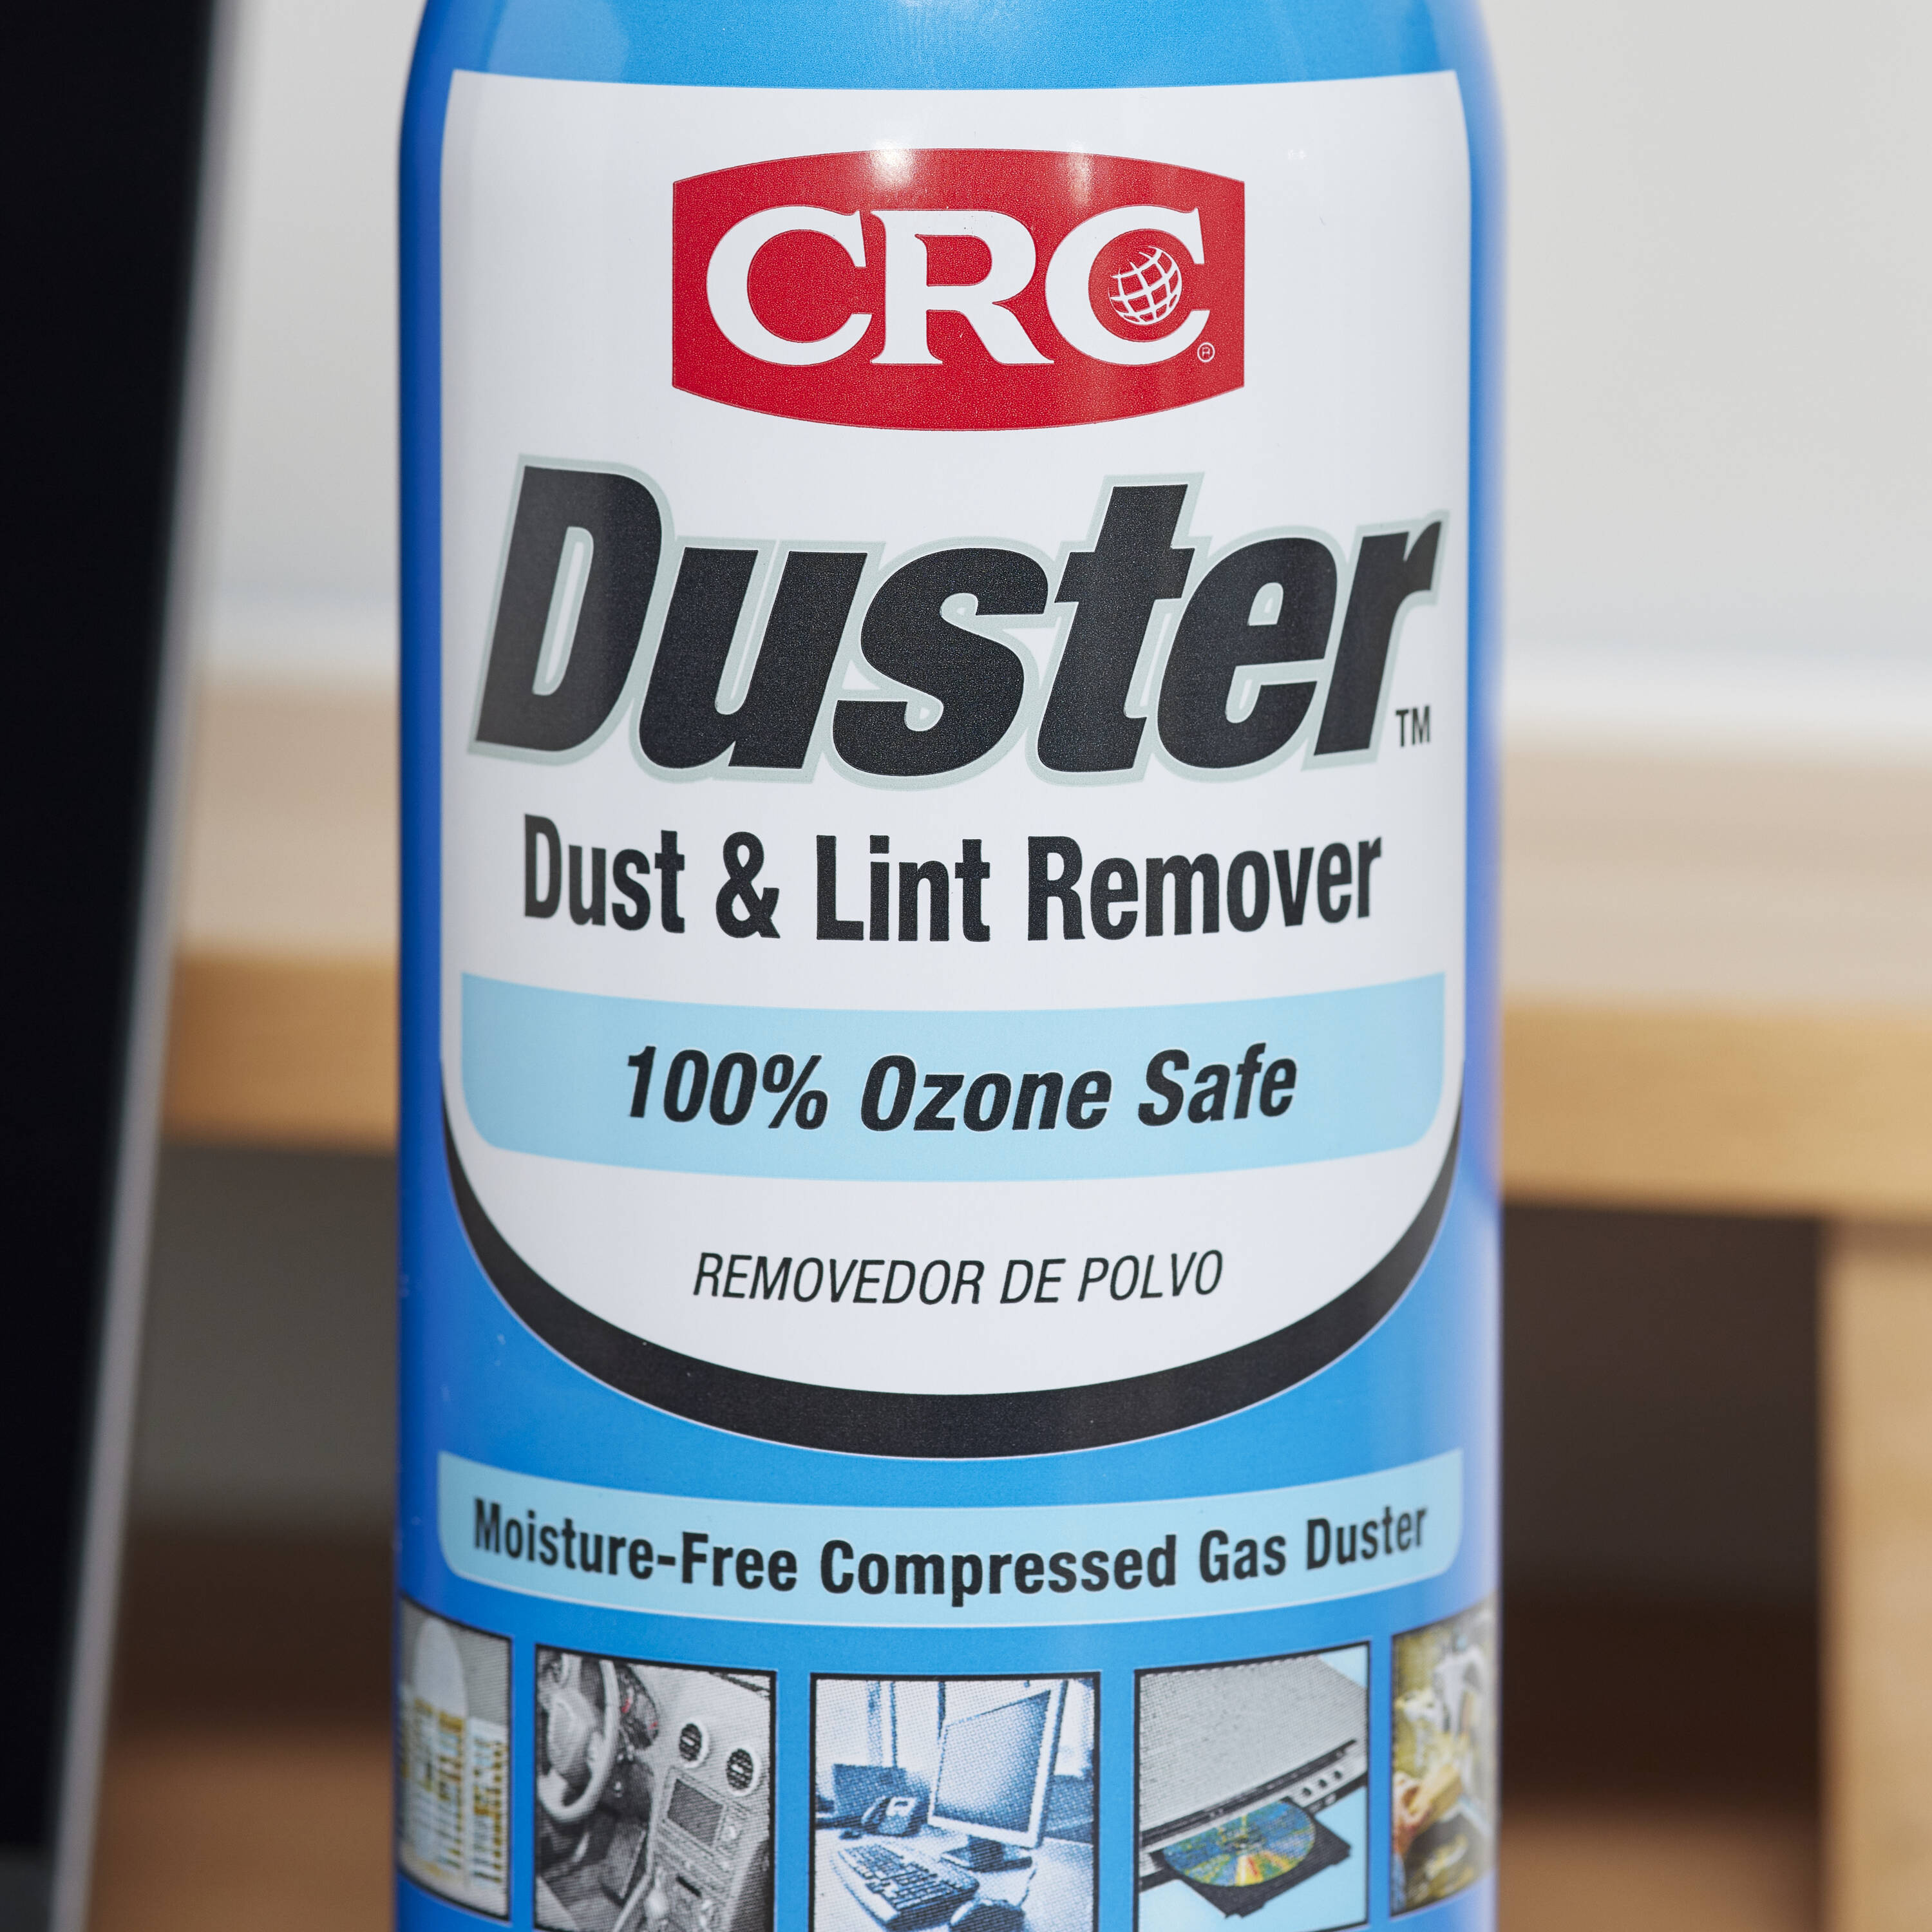 Dust Off Compressed Gas Duster Instant Dust Remover - 10 fl oz bottle